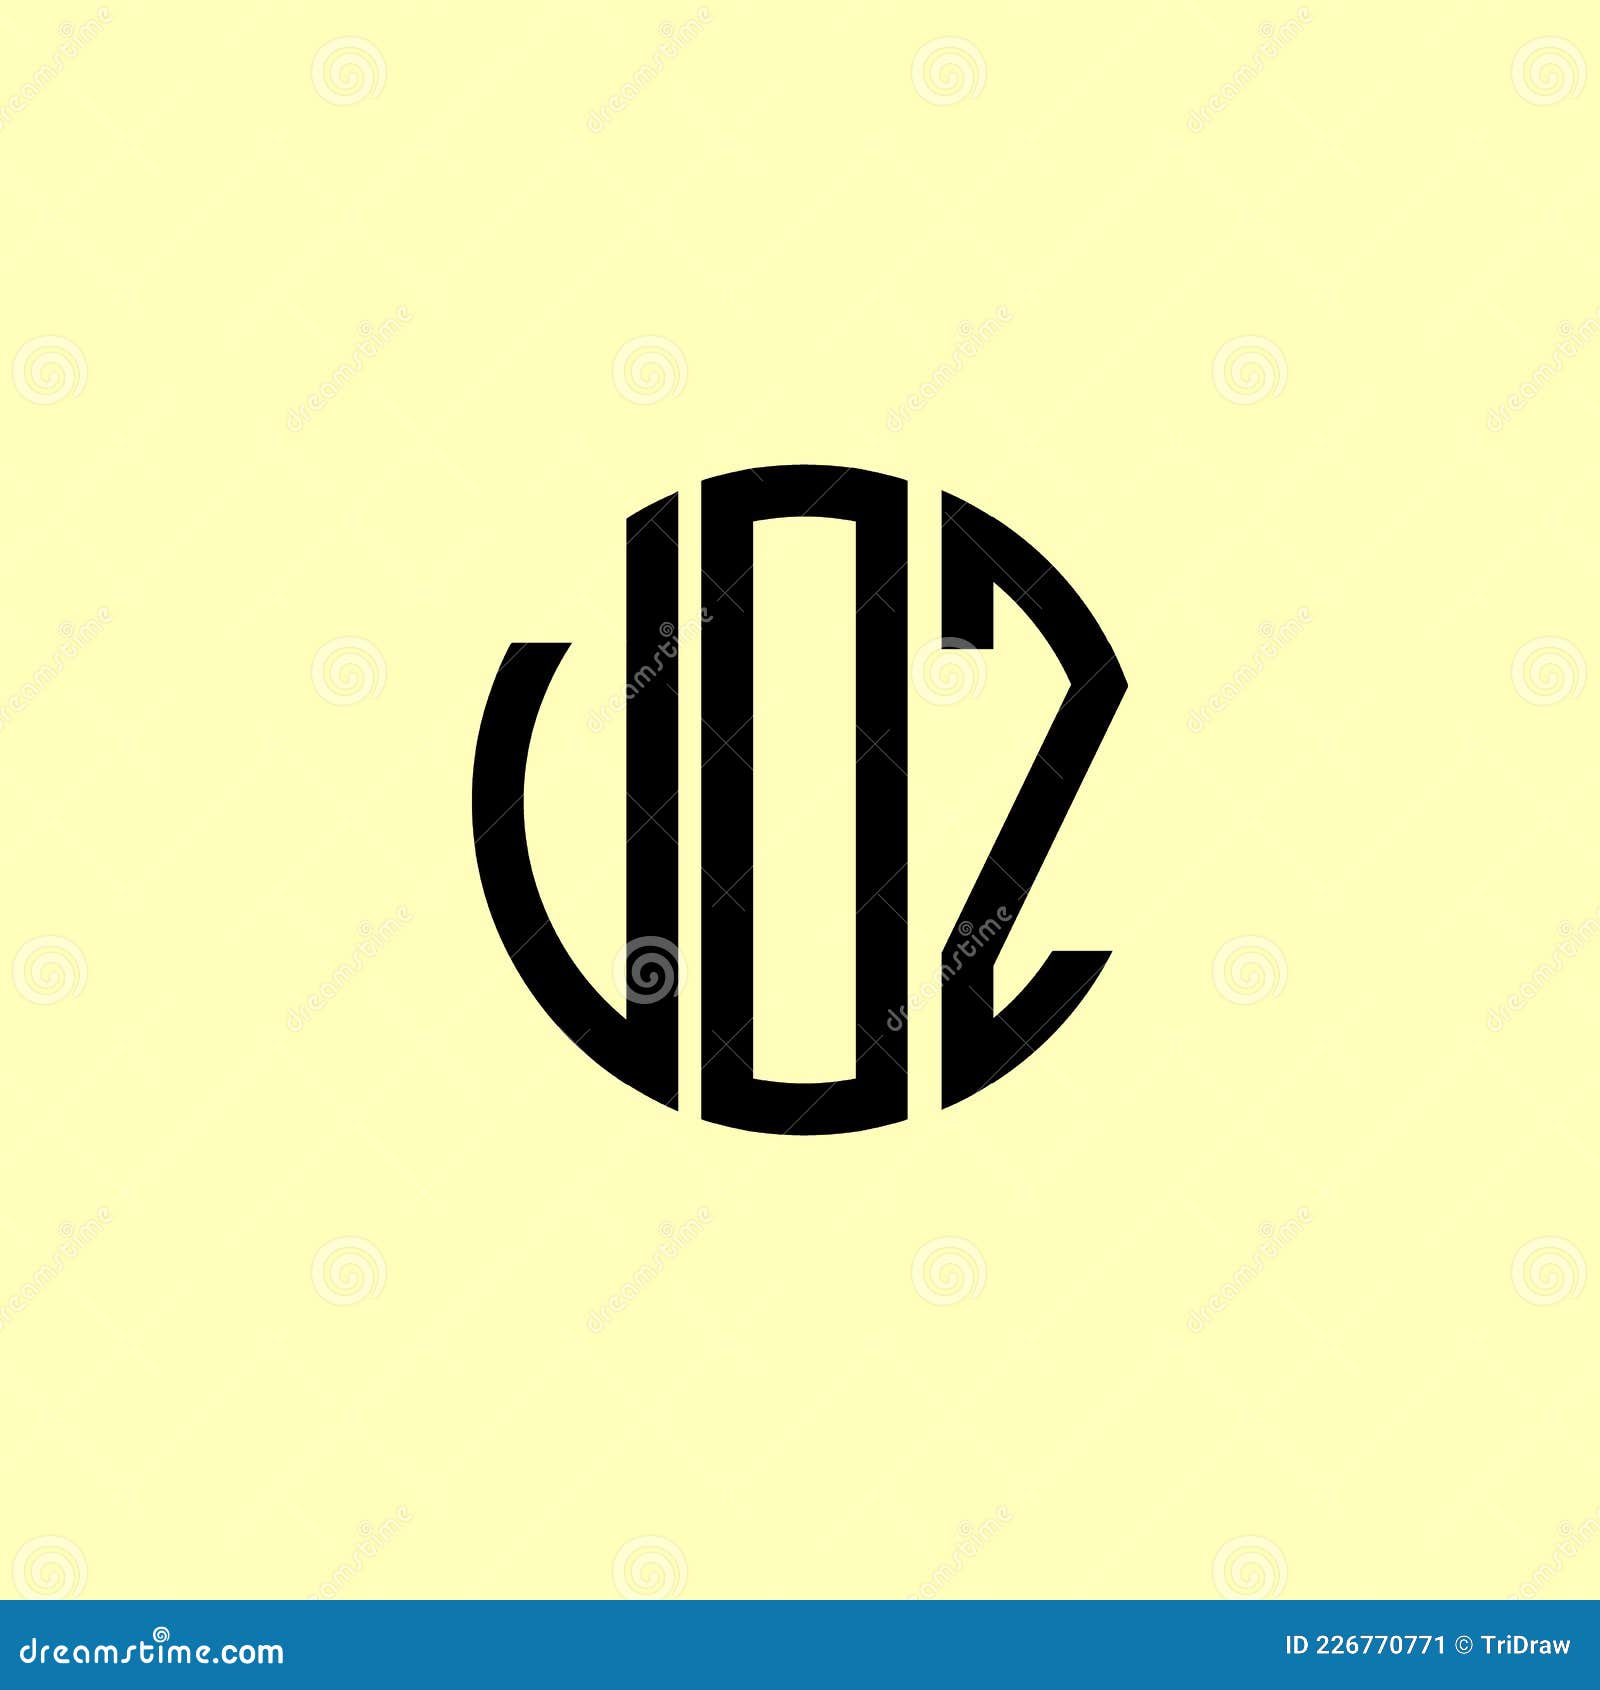 creative rounded initial letters voz logo